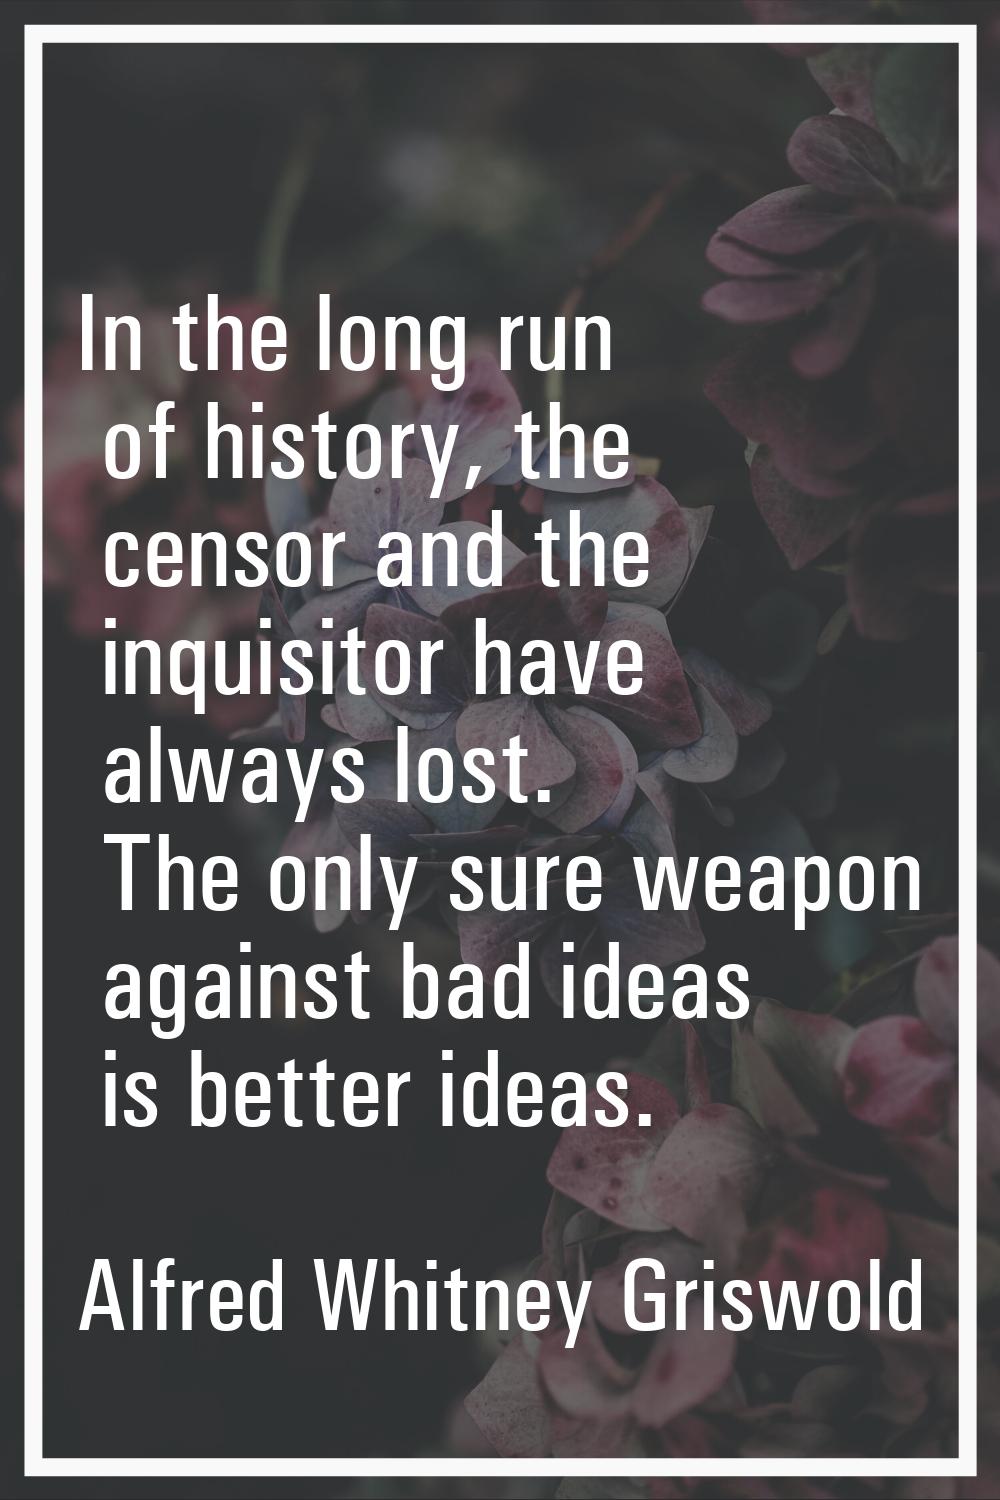 In the long run of history, the censor and the inquisitor have always lost. The only sure weapon ag